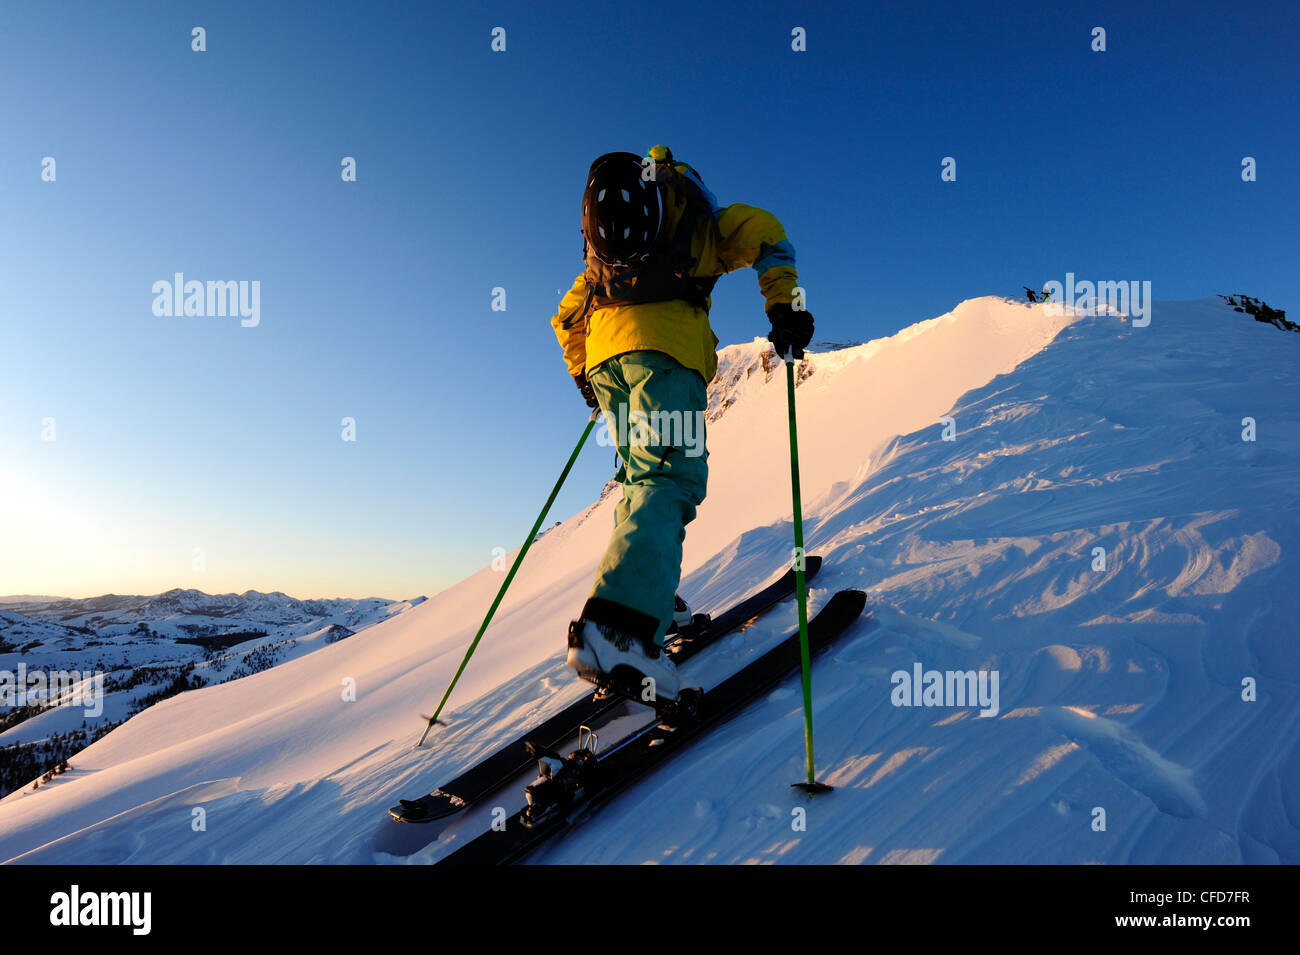 A skier skinning up a snow covered slope at sunrise in the Sierra Nevada near Lake Tahoe, California. Stock Photo